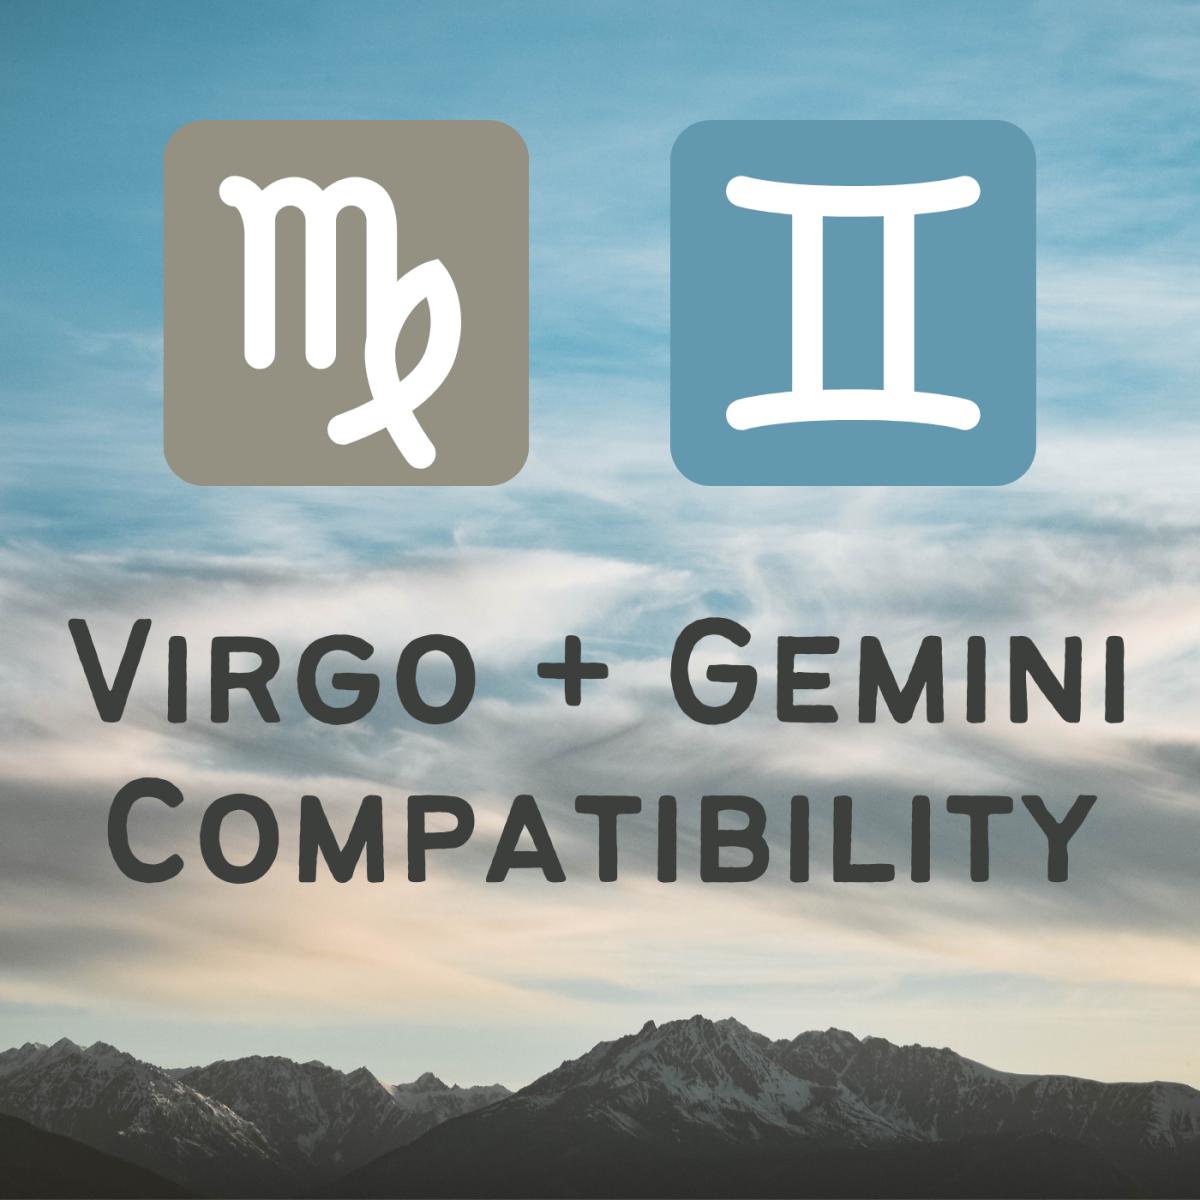 Does the virgin get along with the twin, or do they argue? See the astrocompatibility of these two signs.